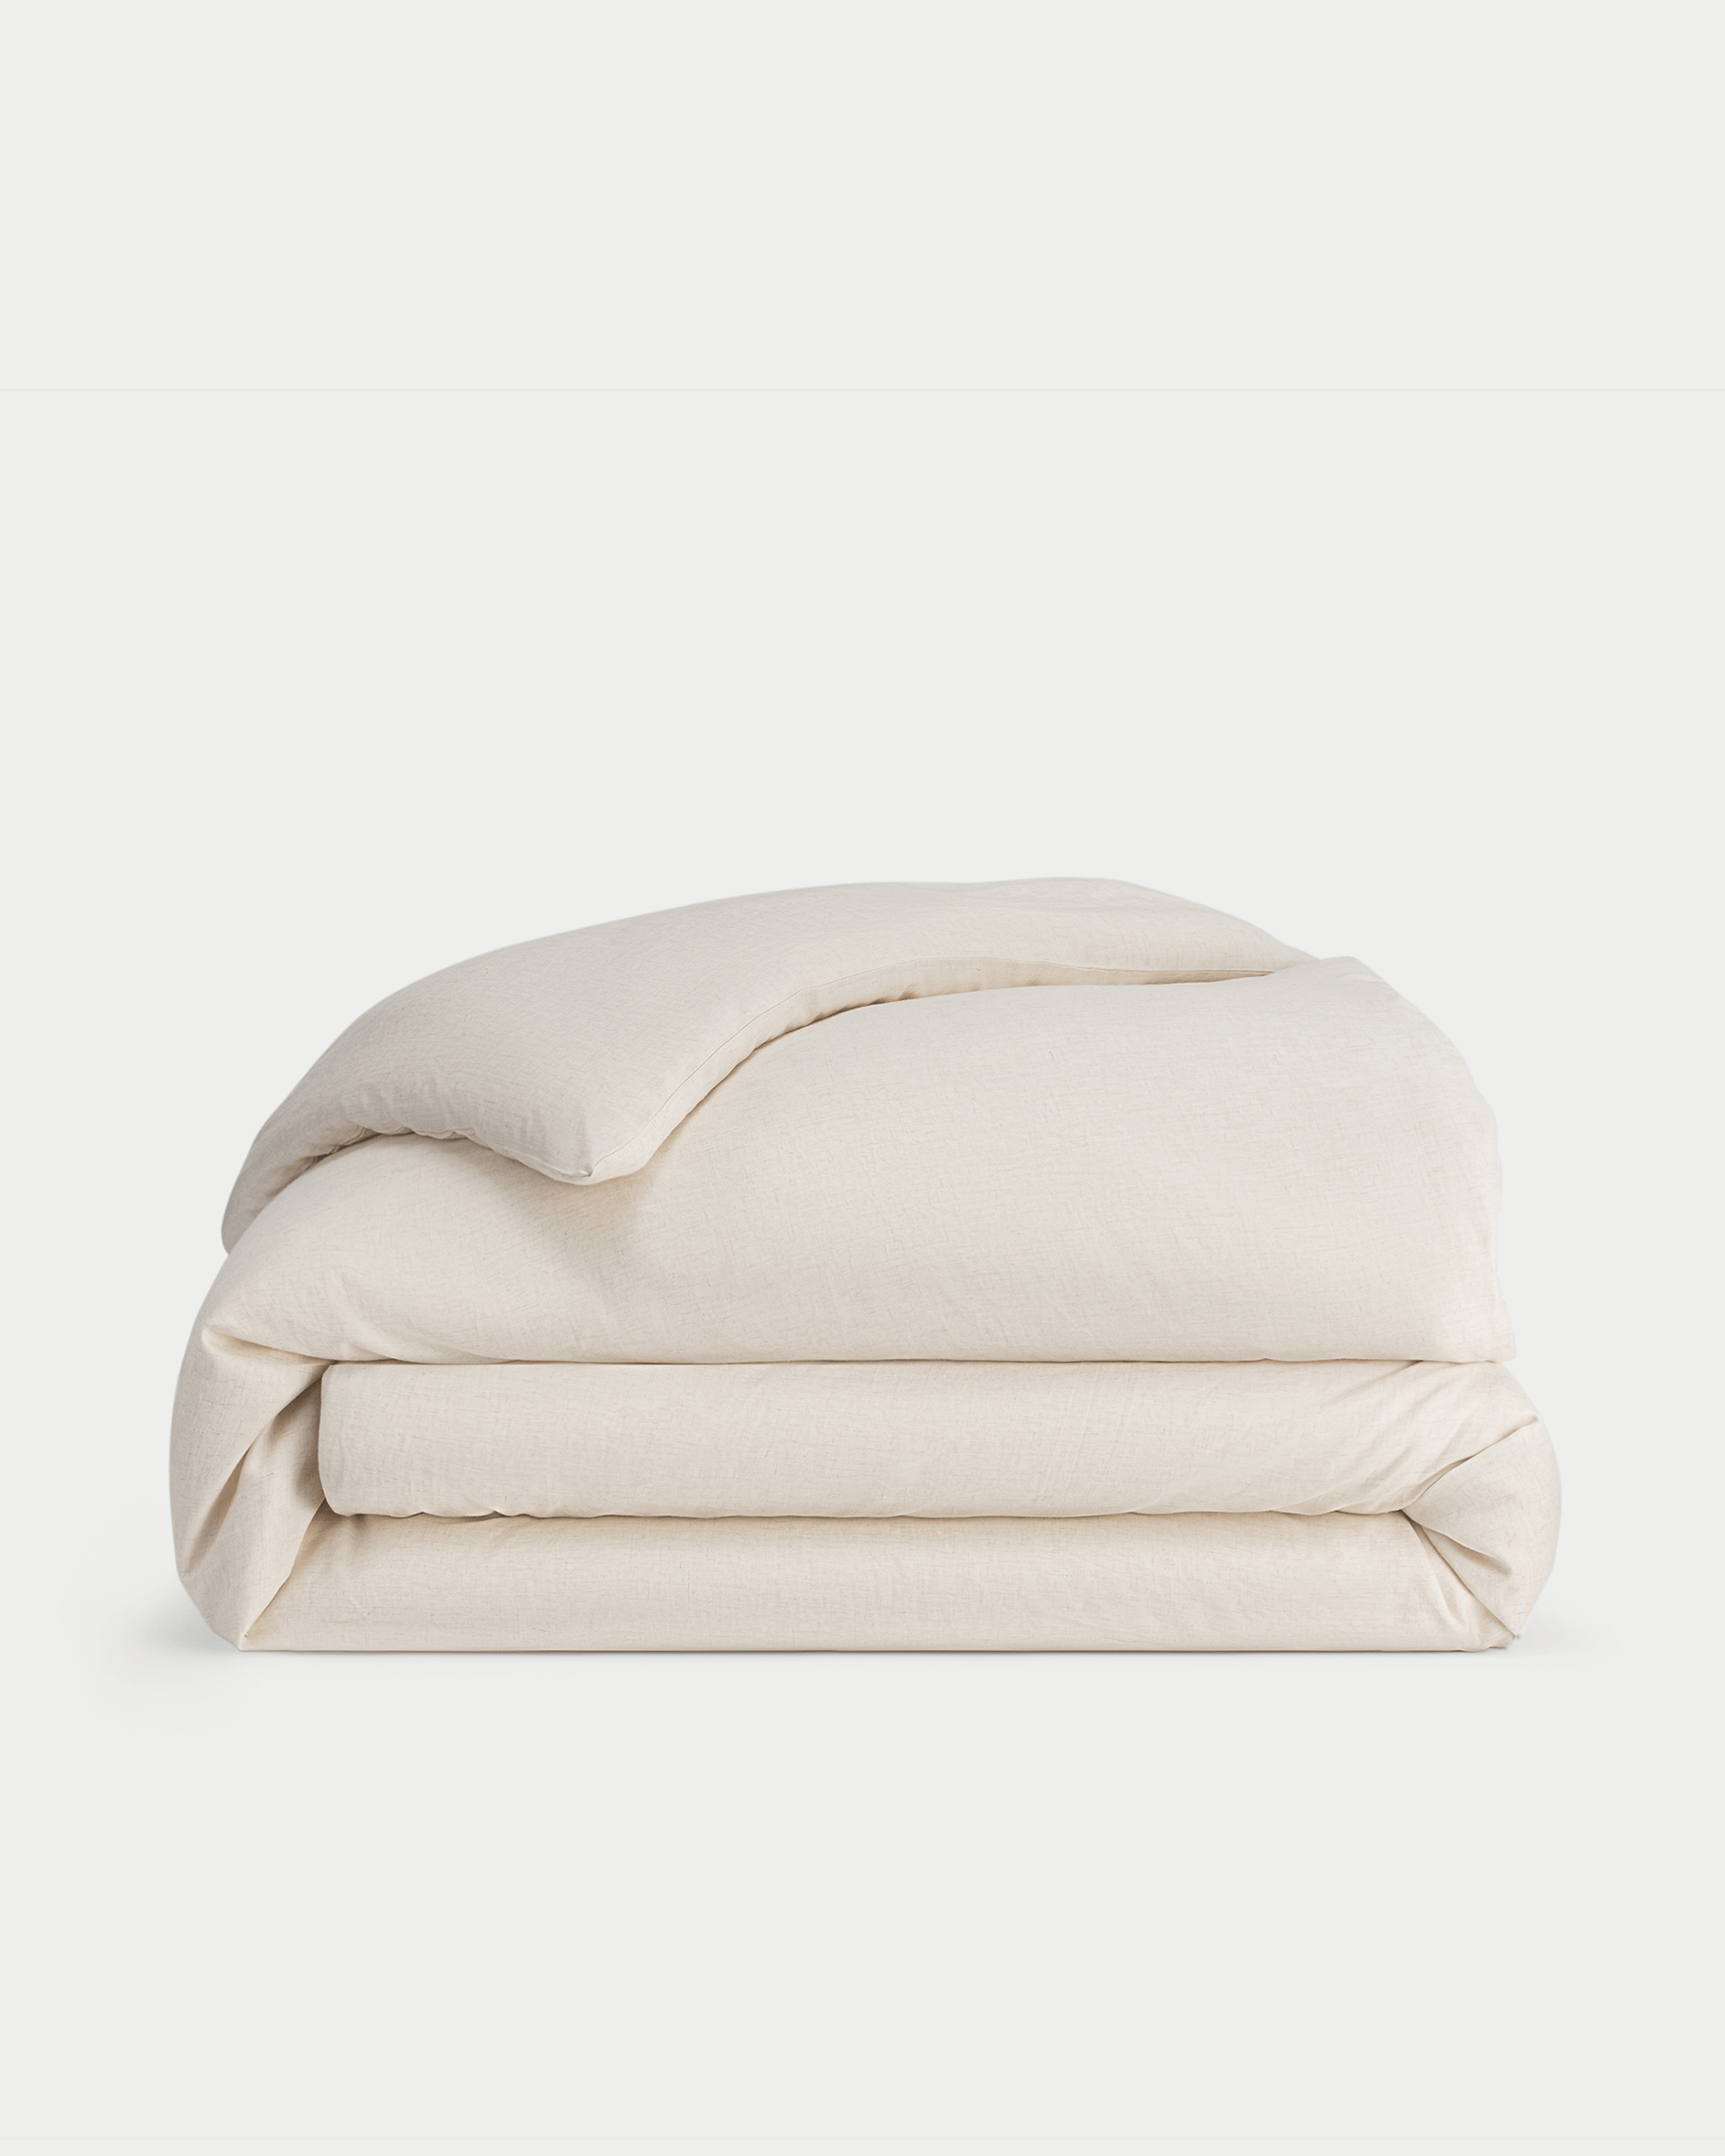 Natural Linen Duvet Cover neatly folded over white background. |Color: Natural